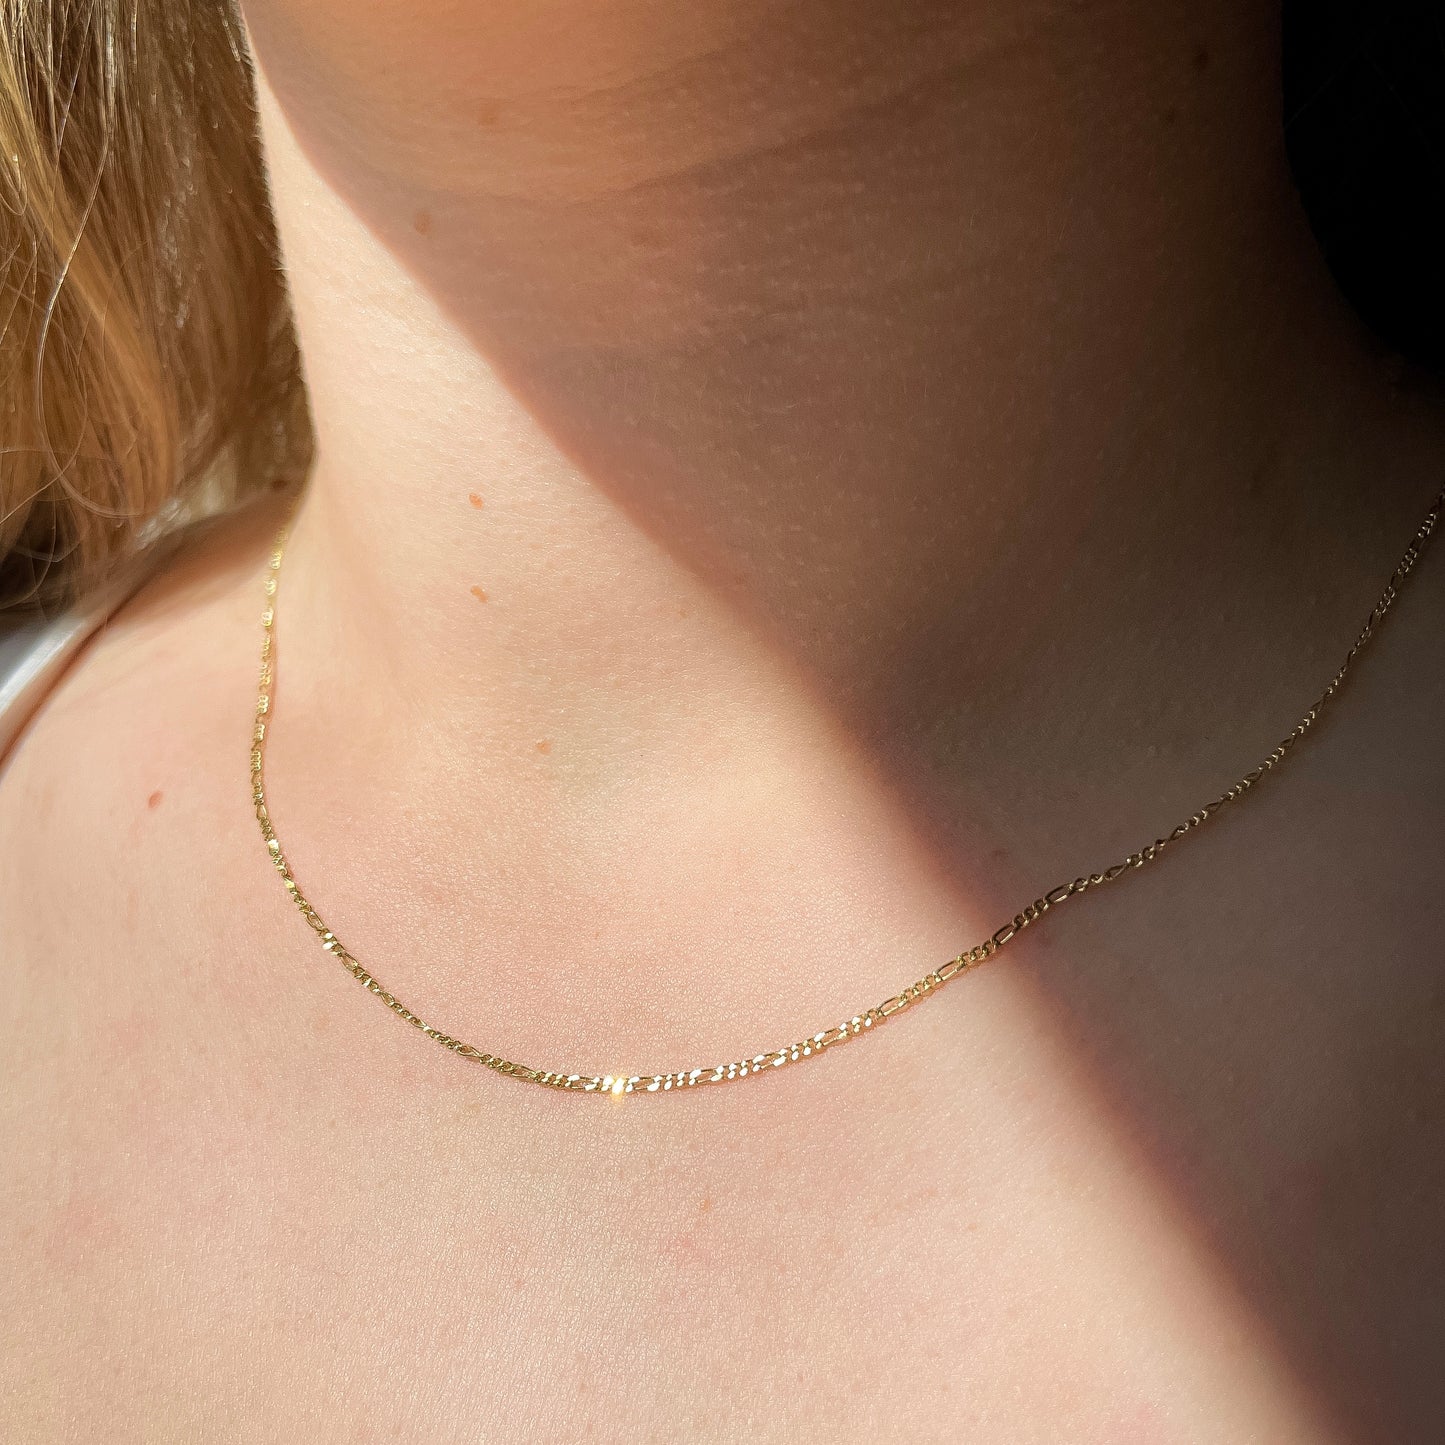 9k solid yellow gold 18" figaro necklace chain